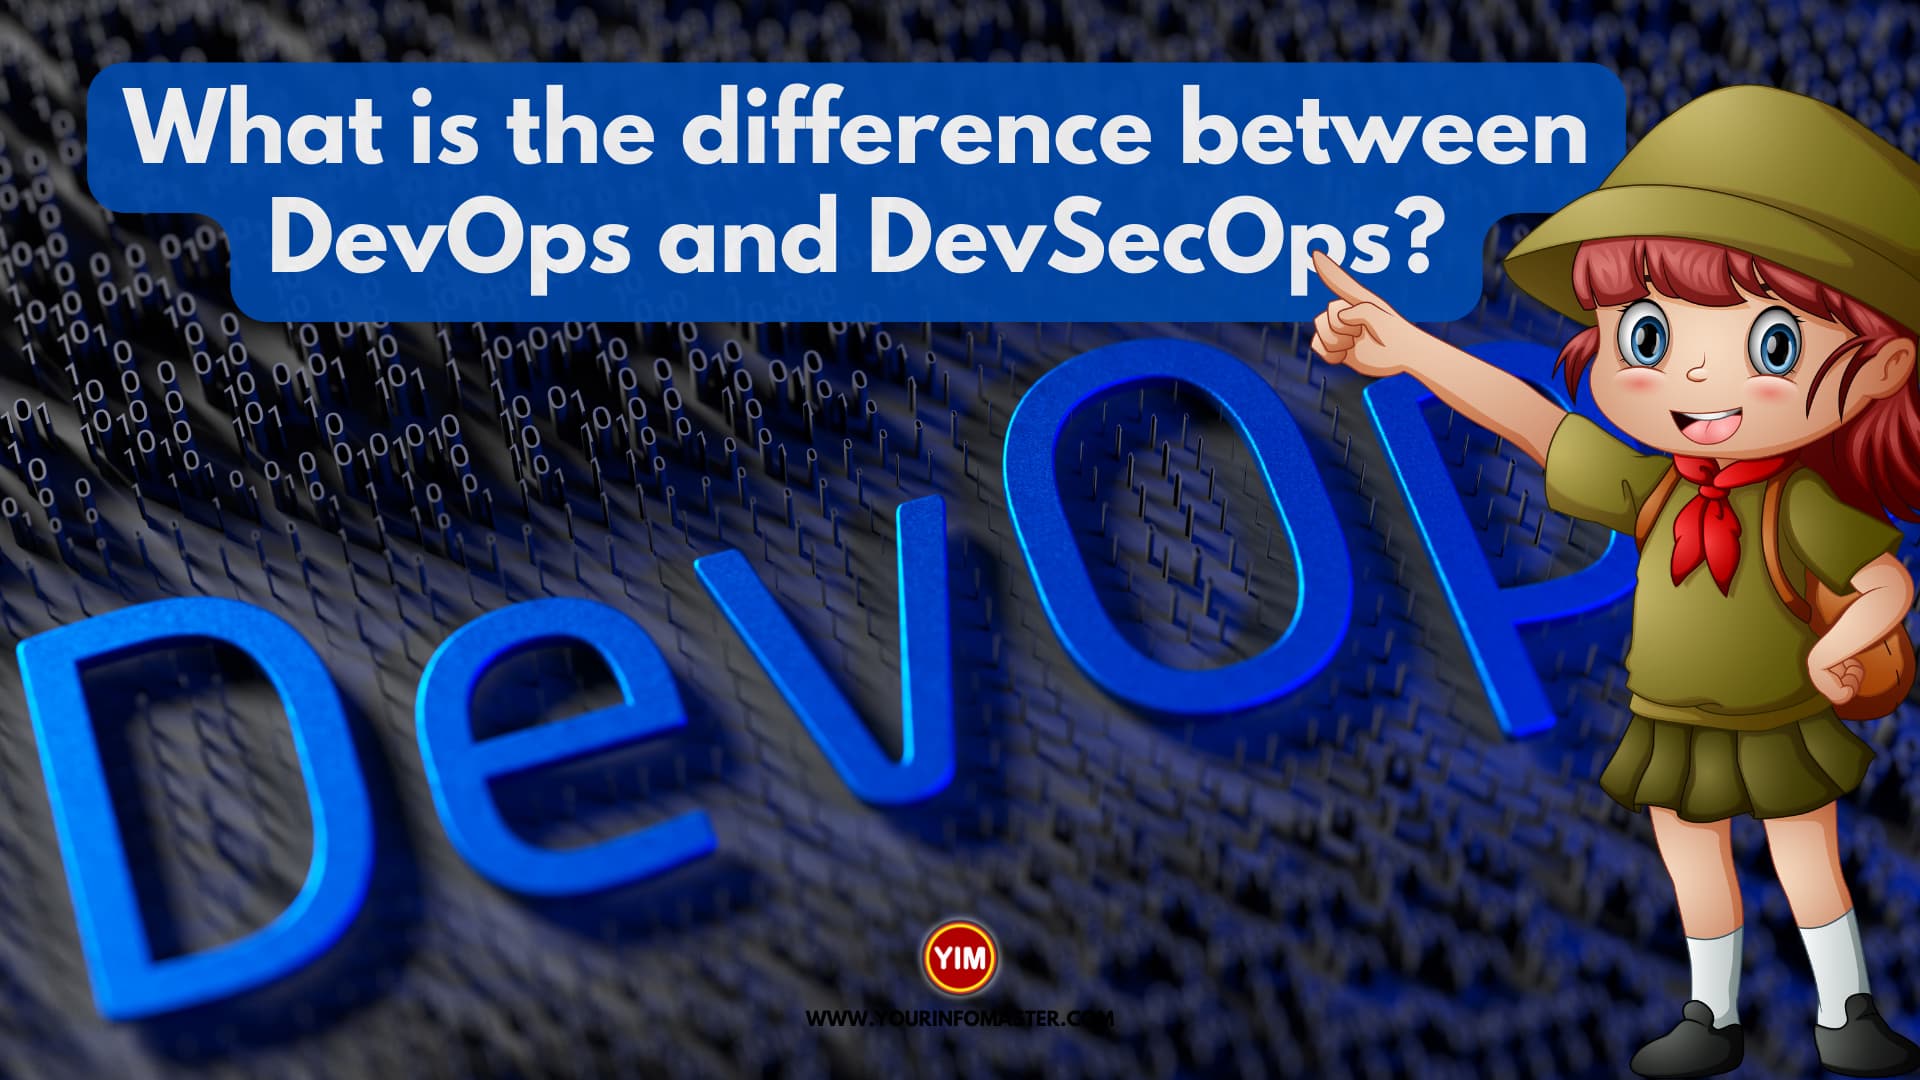 What is the difference between DevOps and DevSecOps